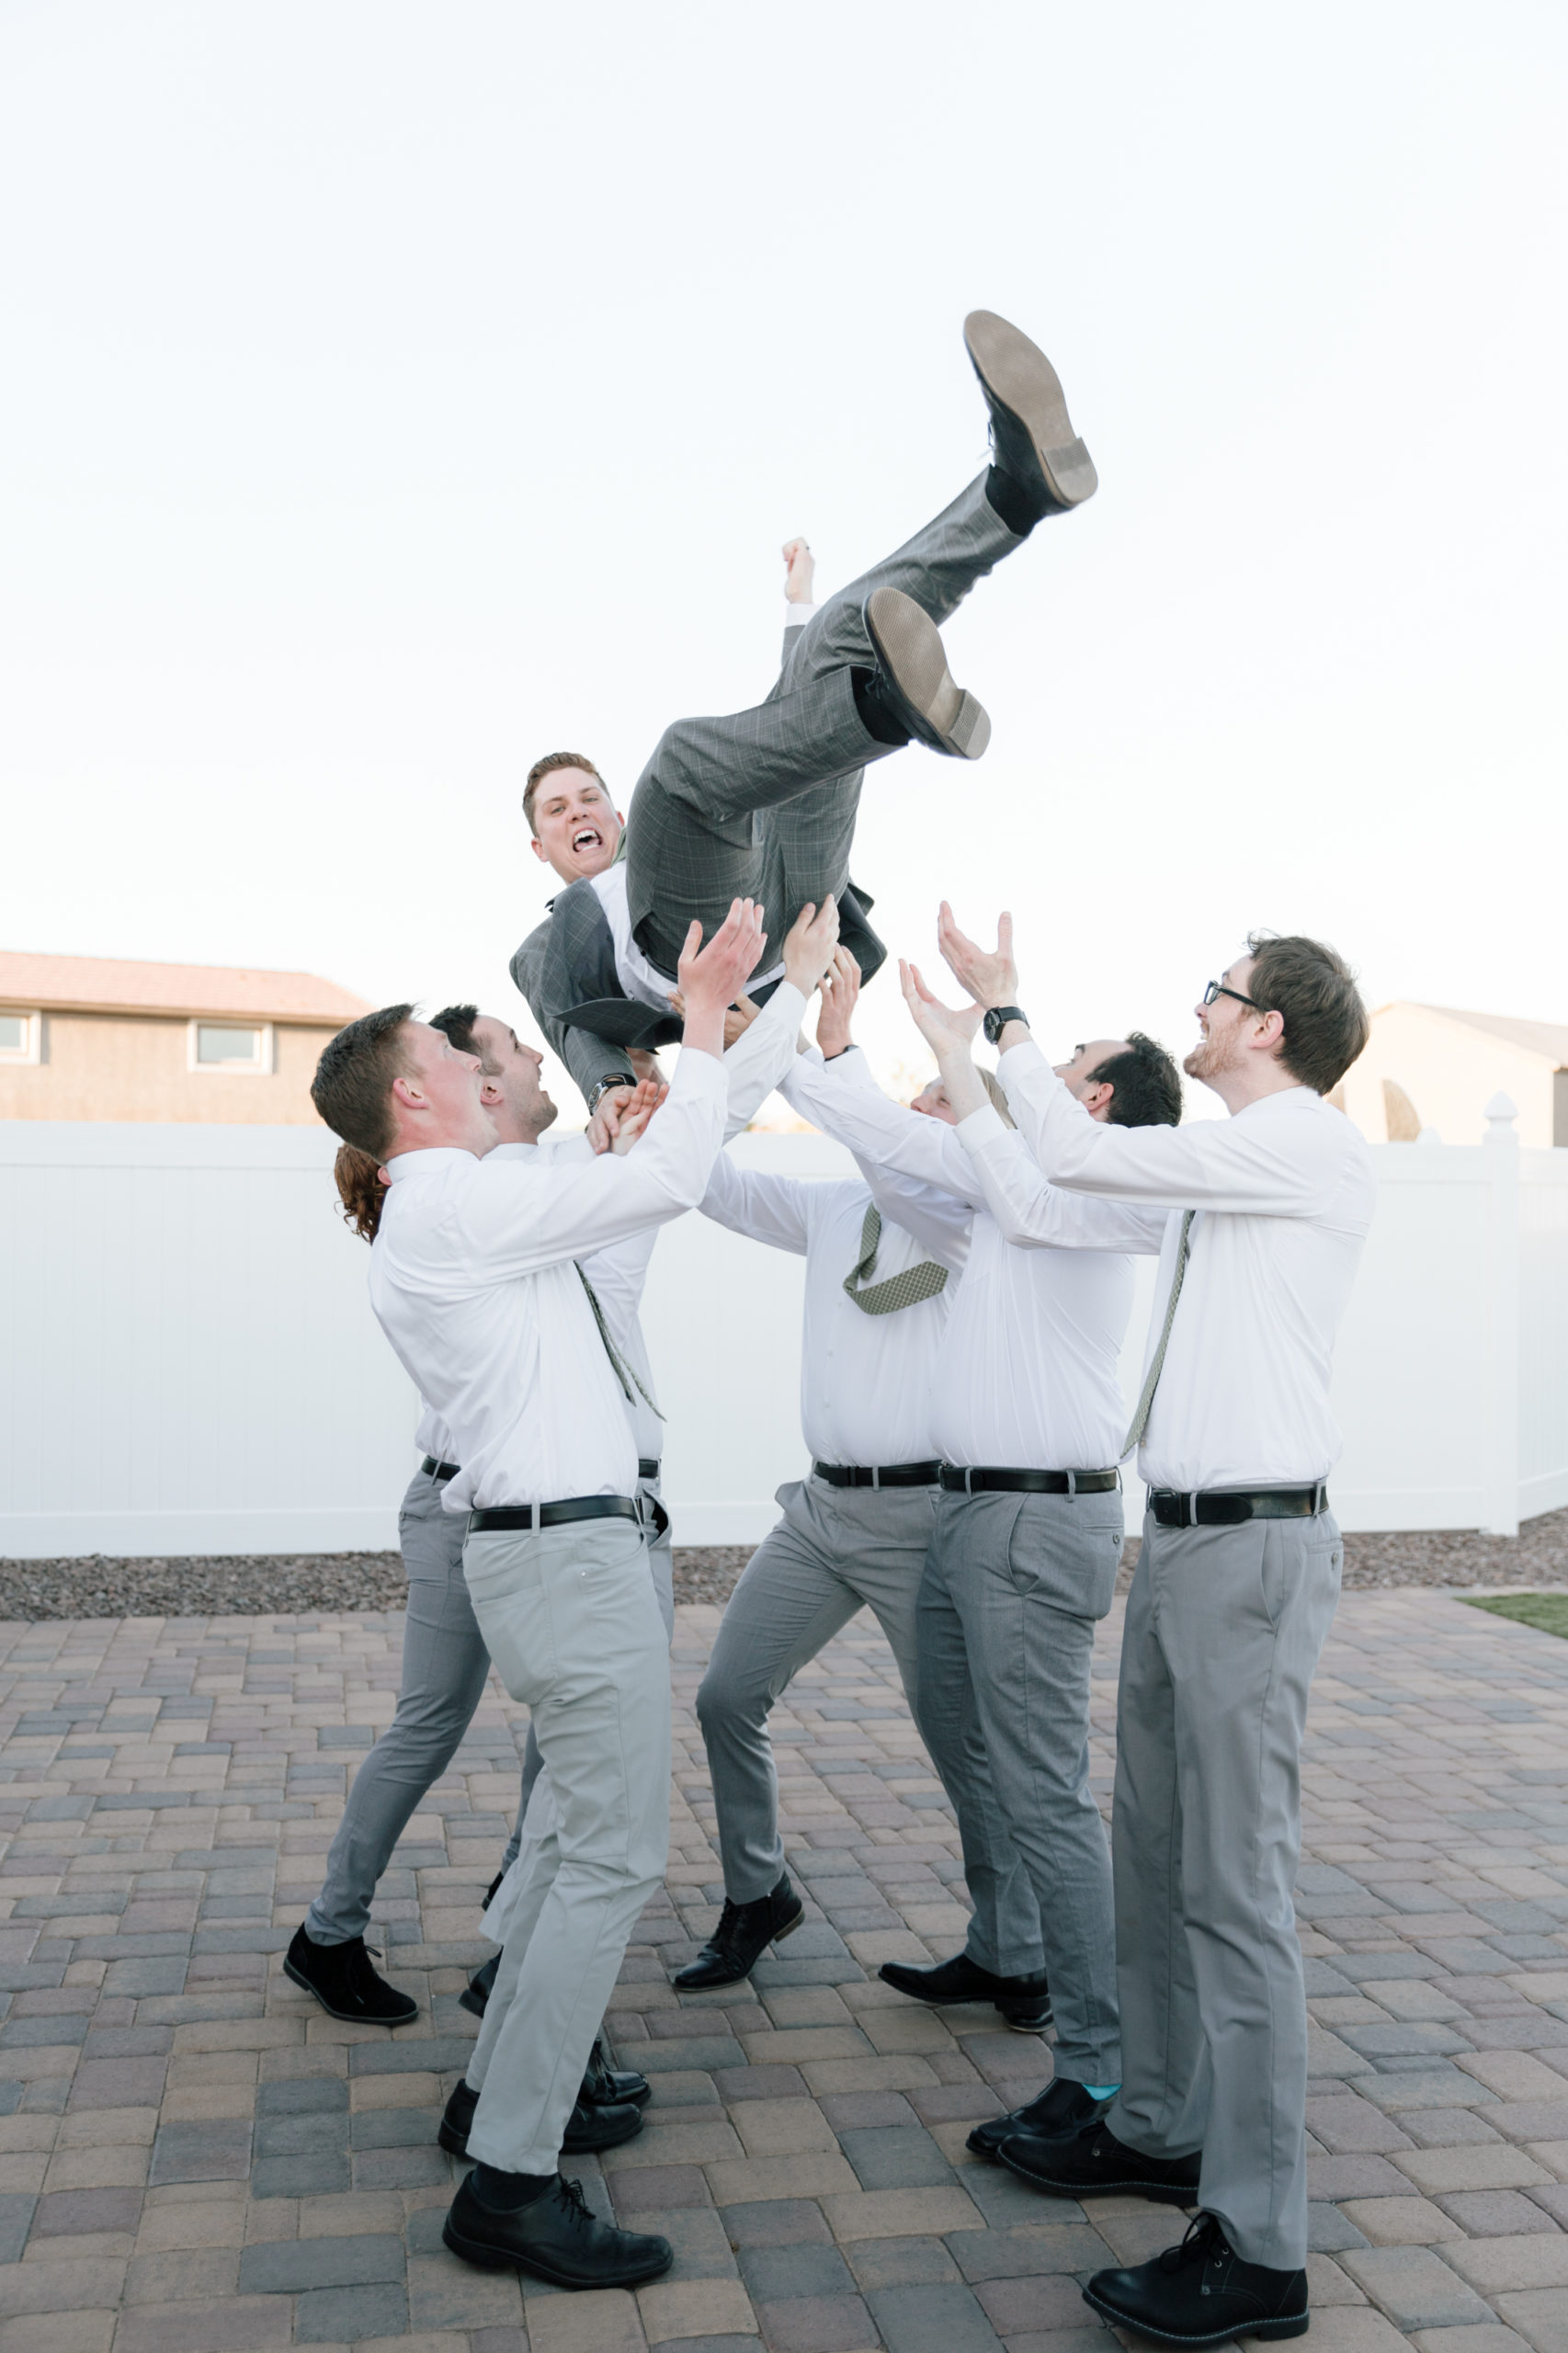 Groomsmen wearing gray pants and white button down shirts throwing groom in the air celebrating during backyard wedding.